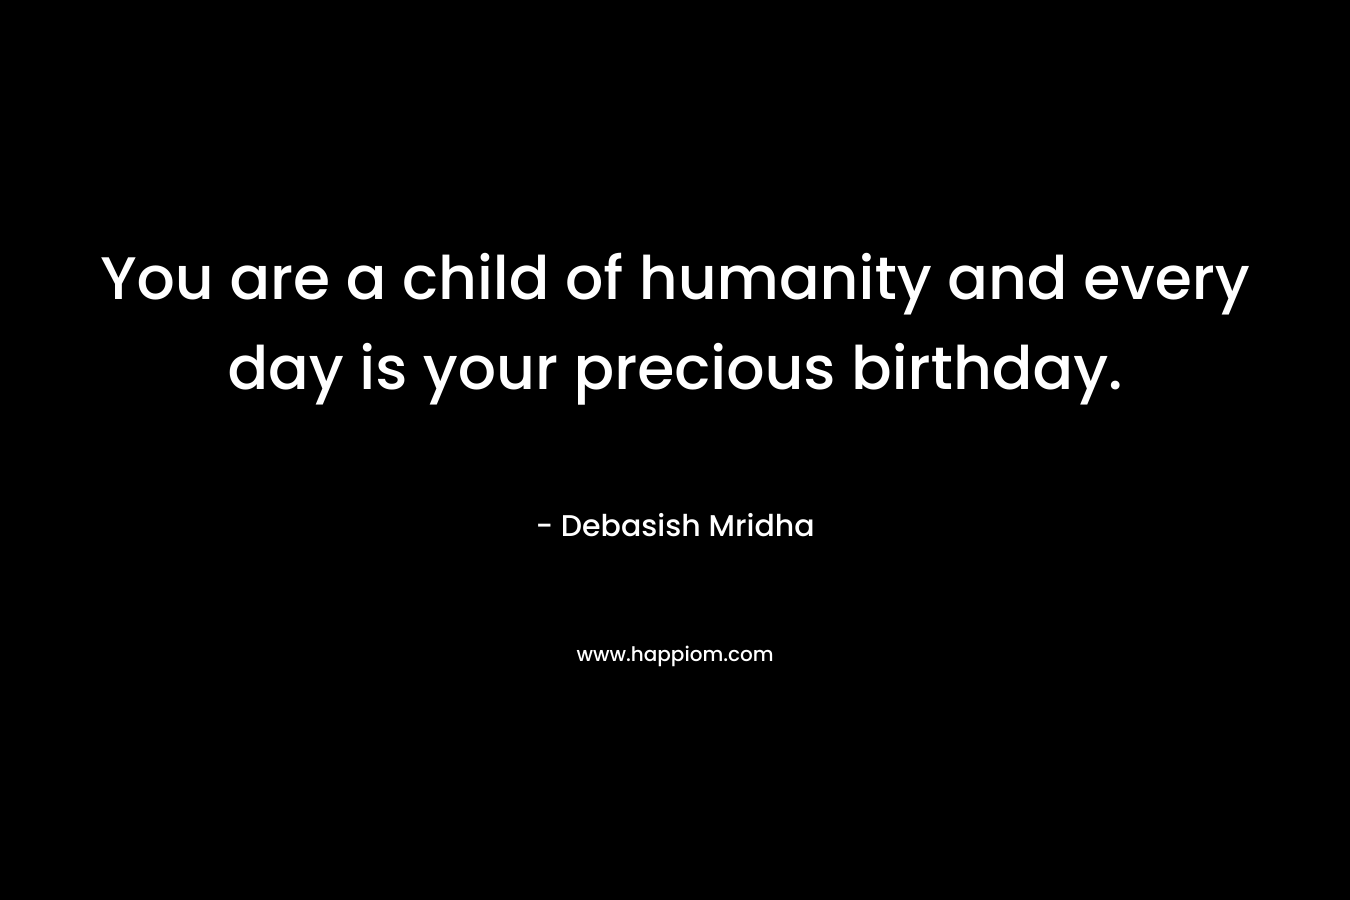 You are a child of humanity and every day is your precious birthday.